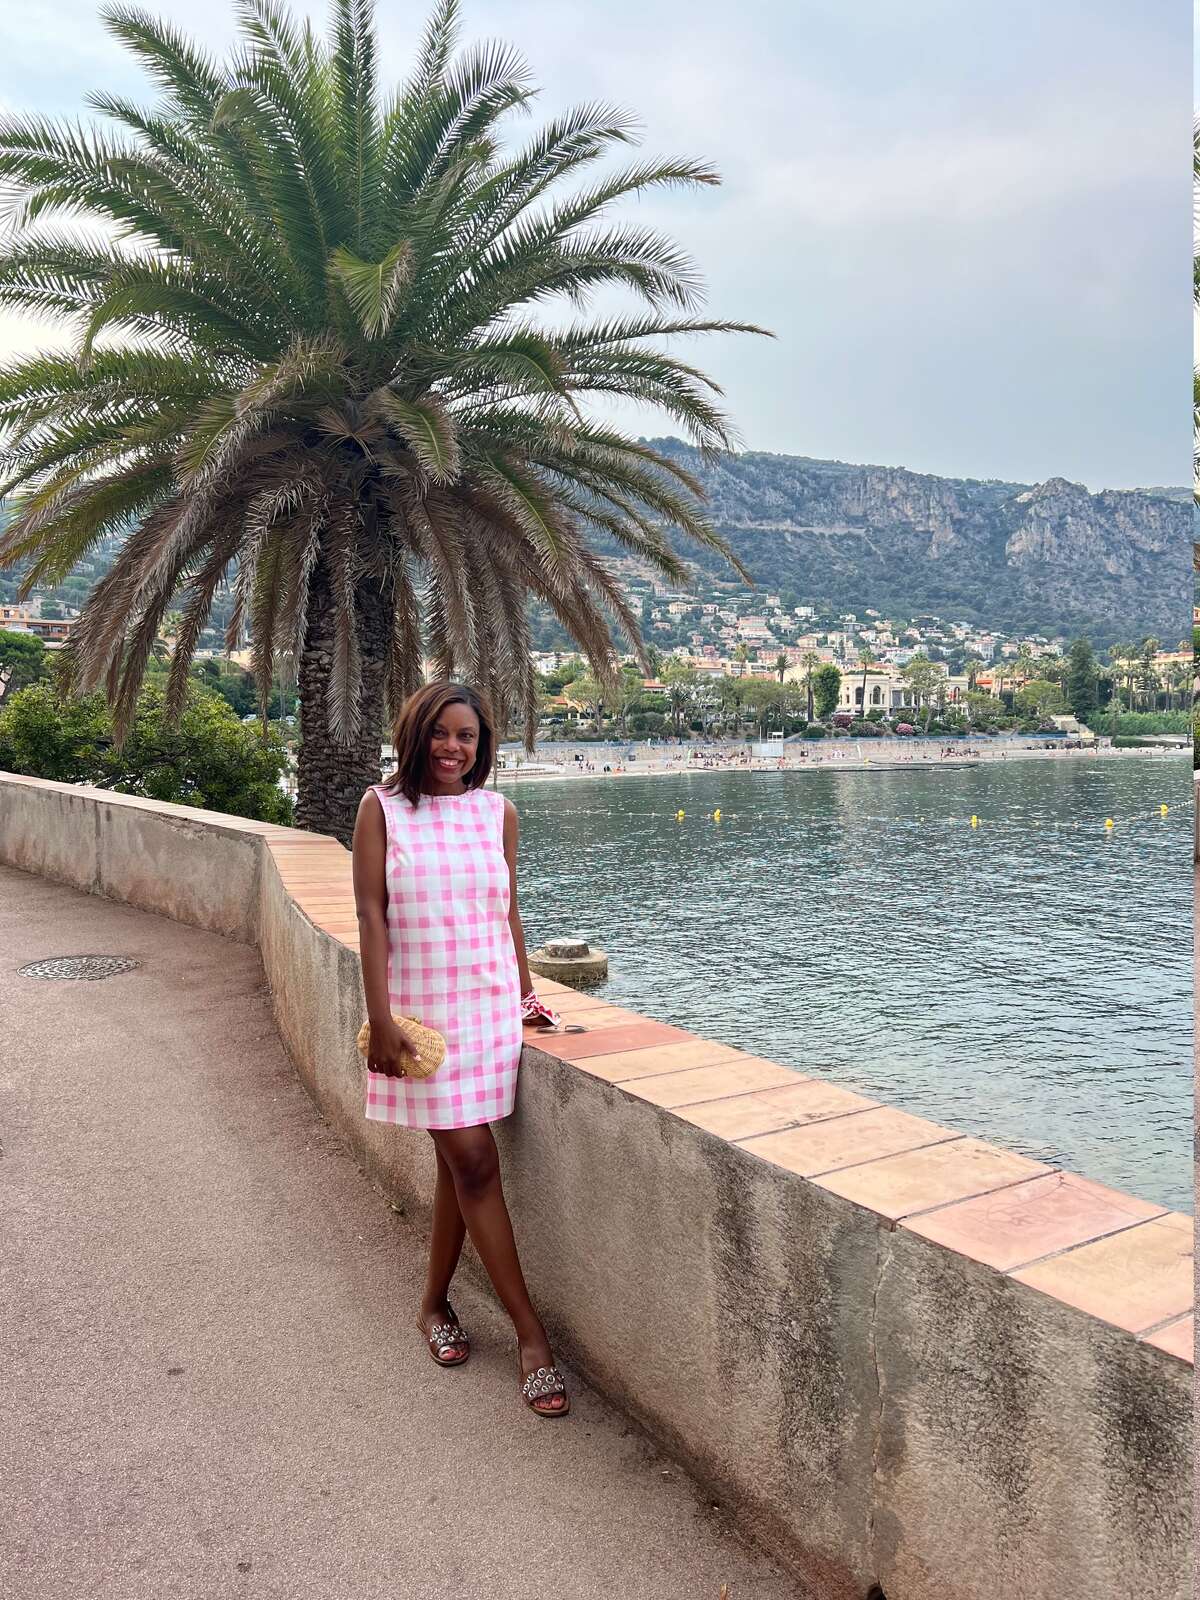 Art and society writer Amber Elliott visits France and Italy during the European heat wave in 2022.